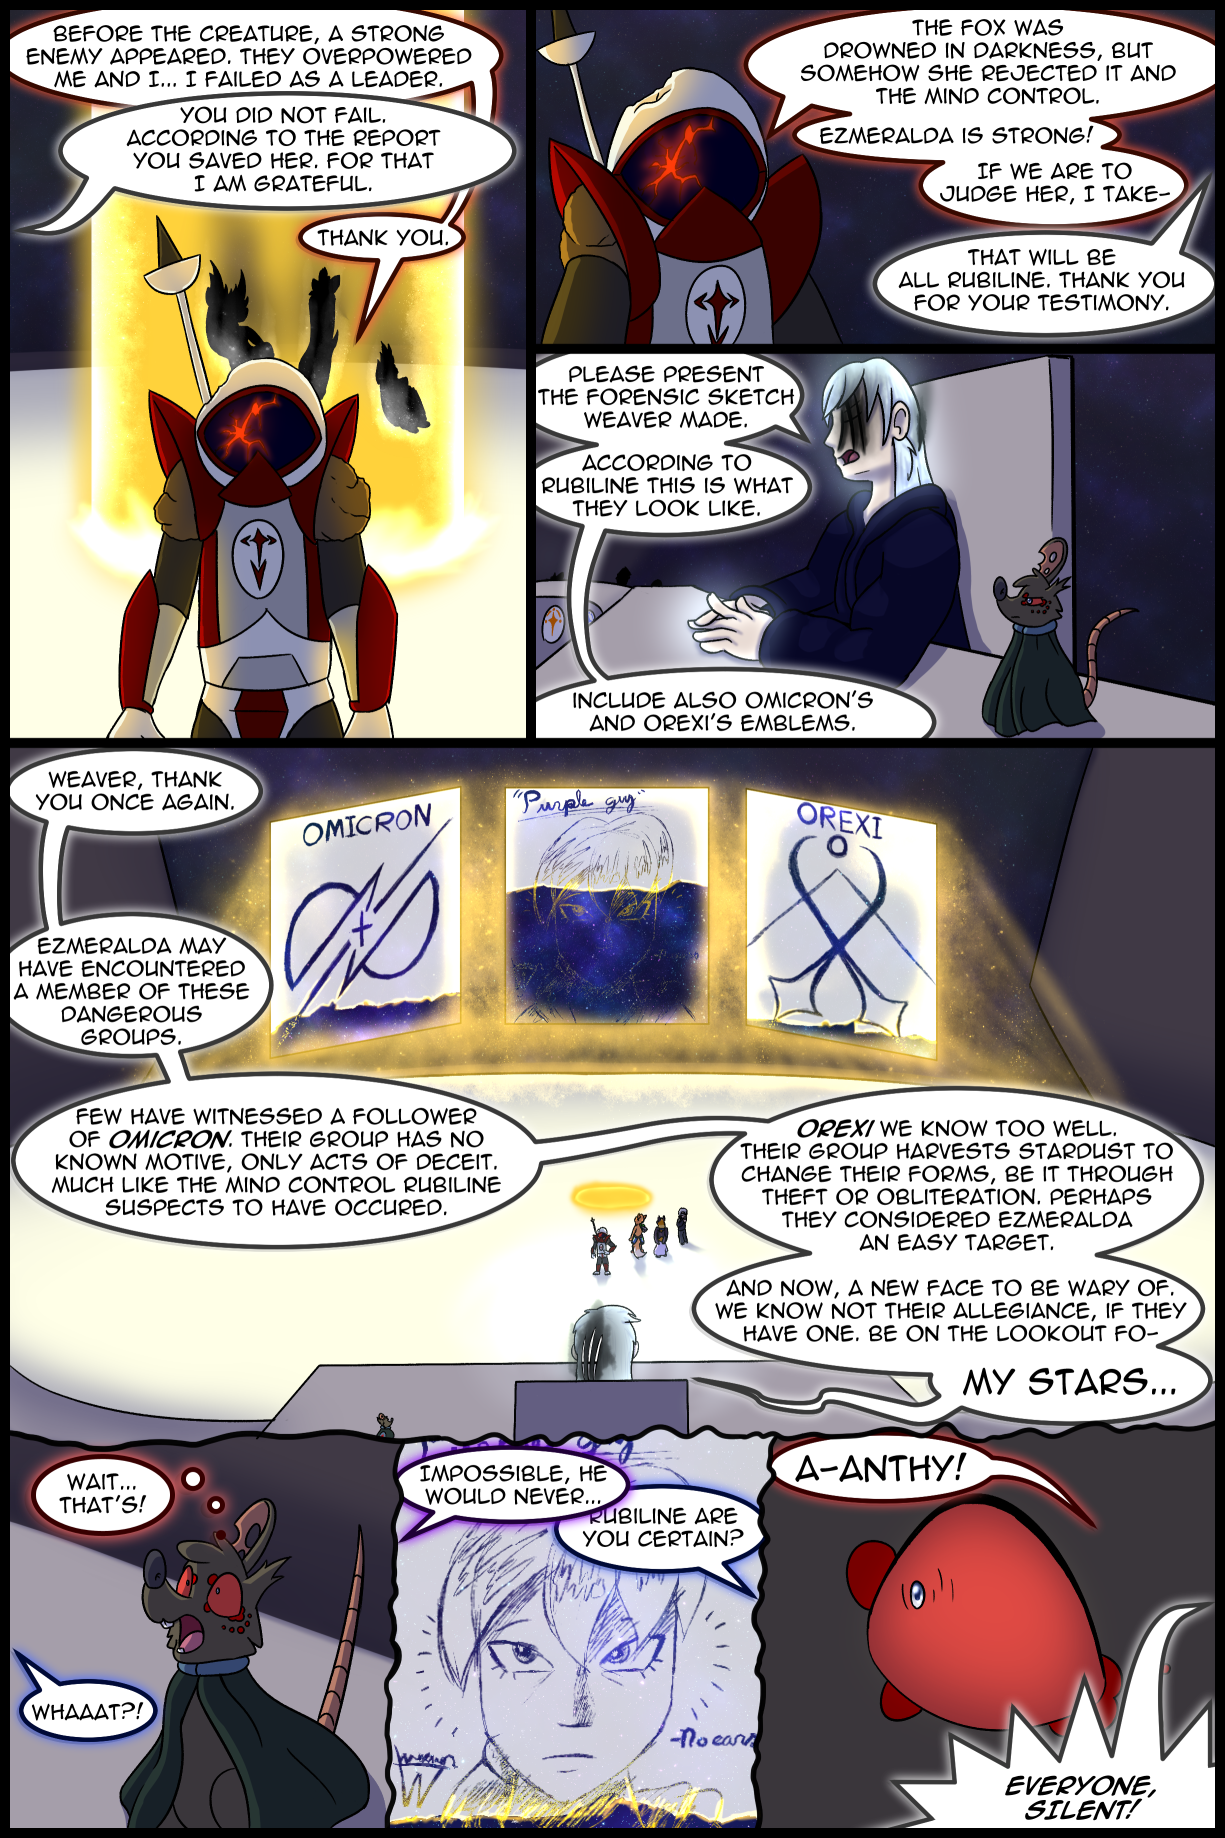 Ch4 Page 11 – Anthy